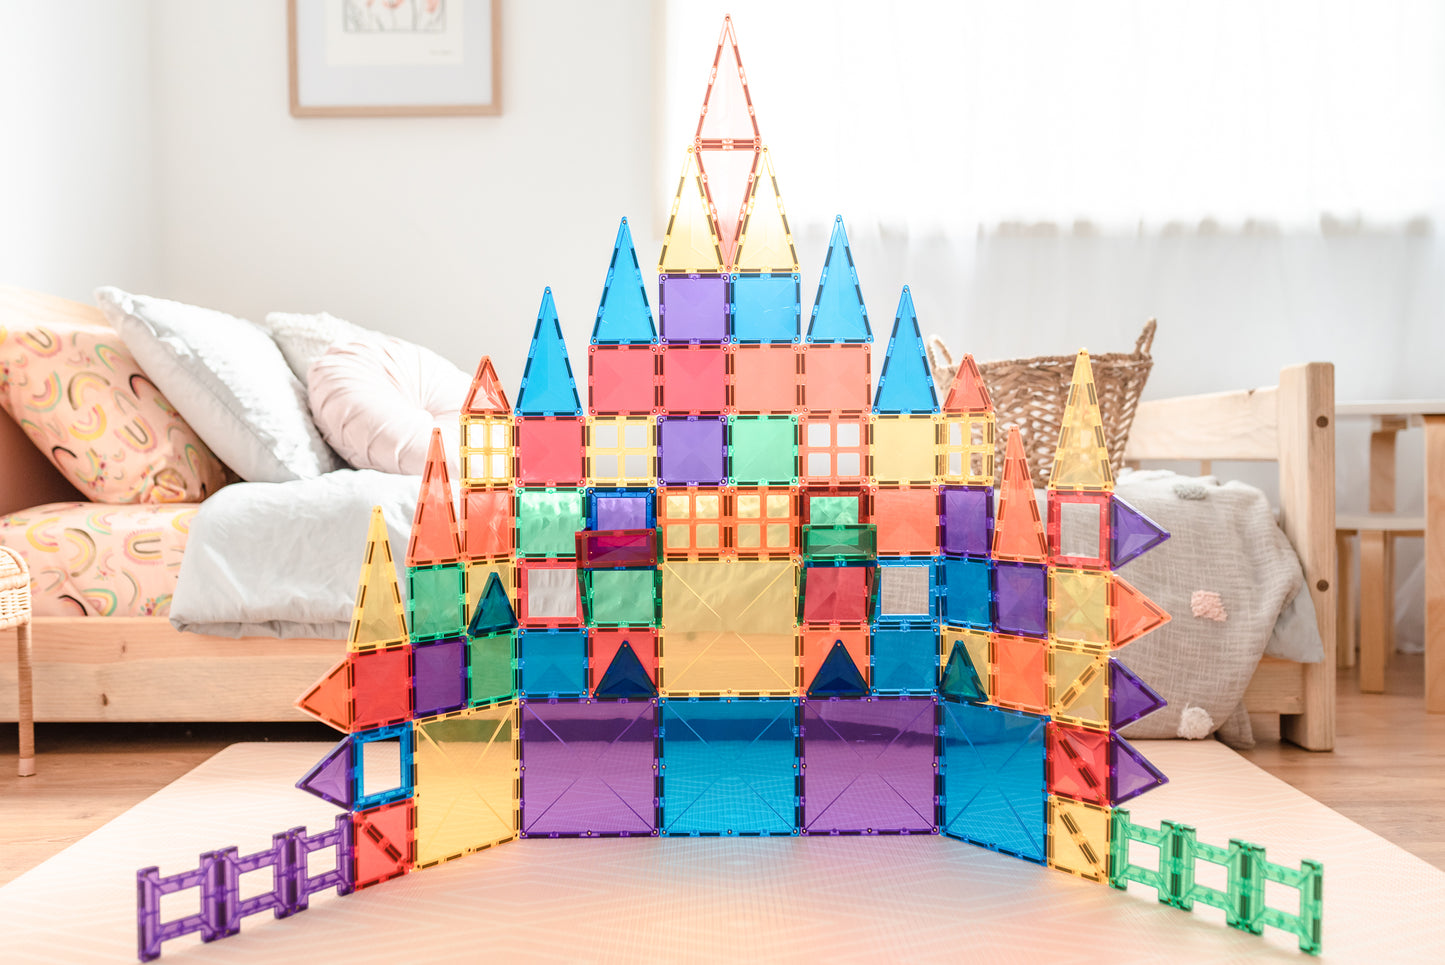 Magnetic Tiles - 102 pc Rainbow Creative Pack